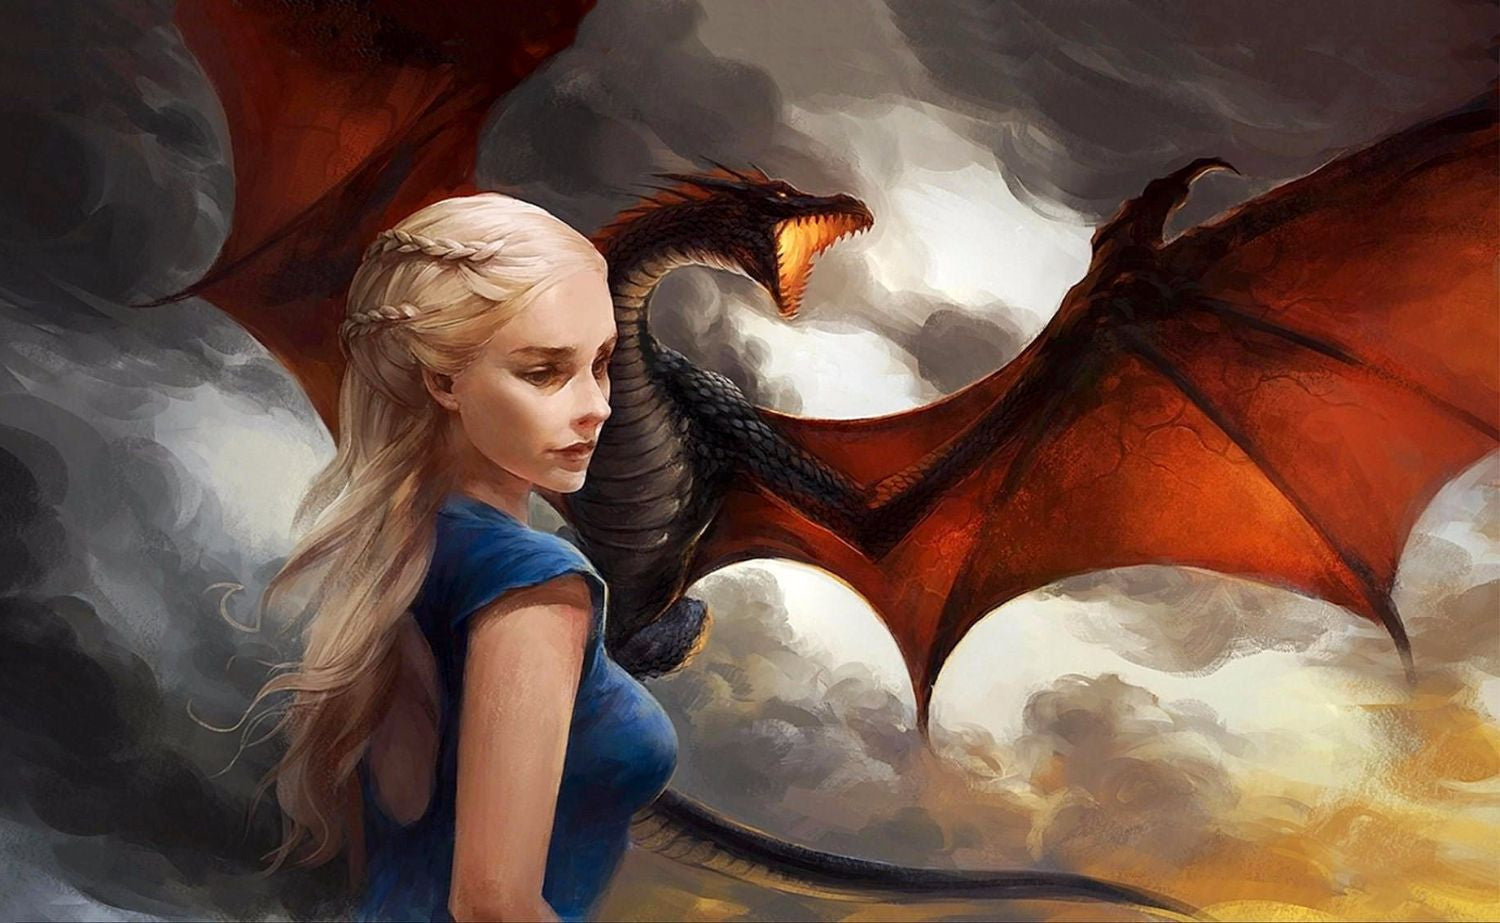 Art From Game Of Thrones - Mother Of Dragons - Daenerys Targaryen And  Drogon - Art Prints by Hamid Raza | Buy Posters, Frames, Canvas & Digital  Art Prints | Small, Compact, Medium and Large Variants